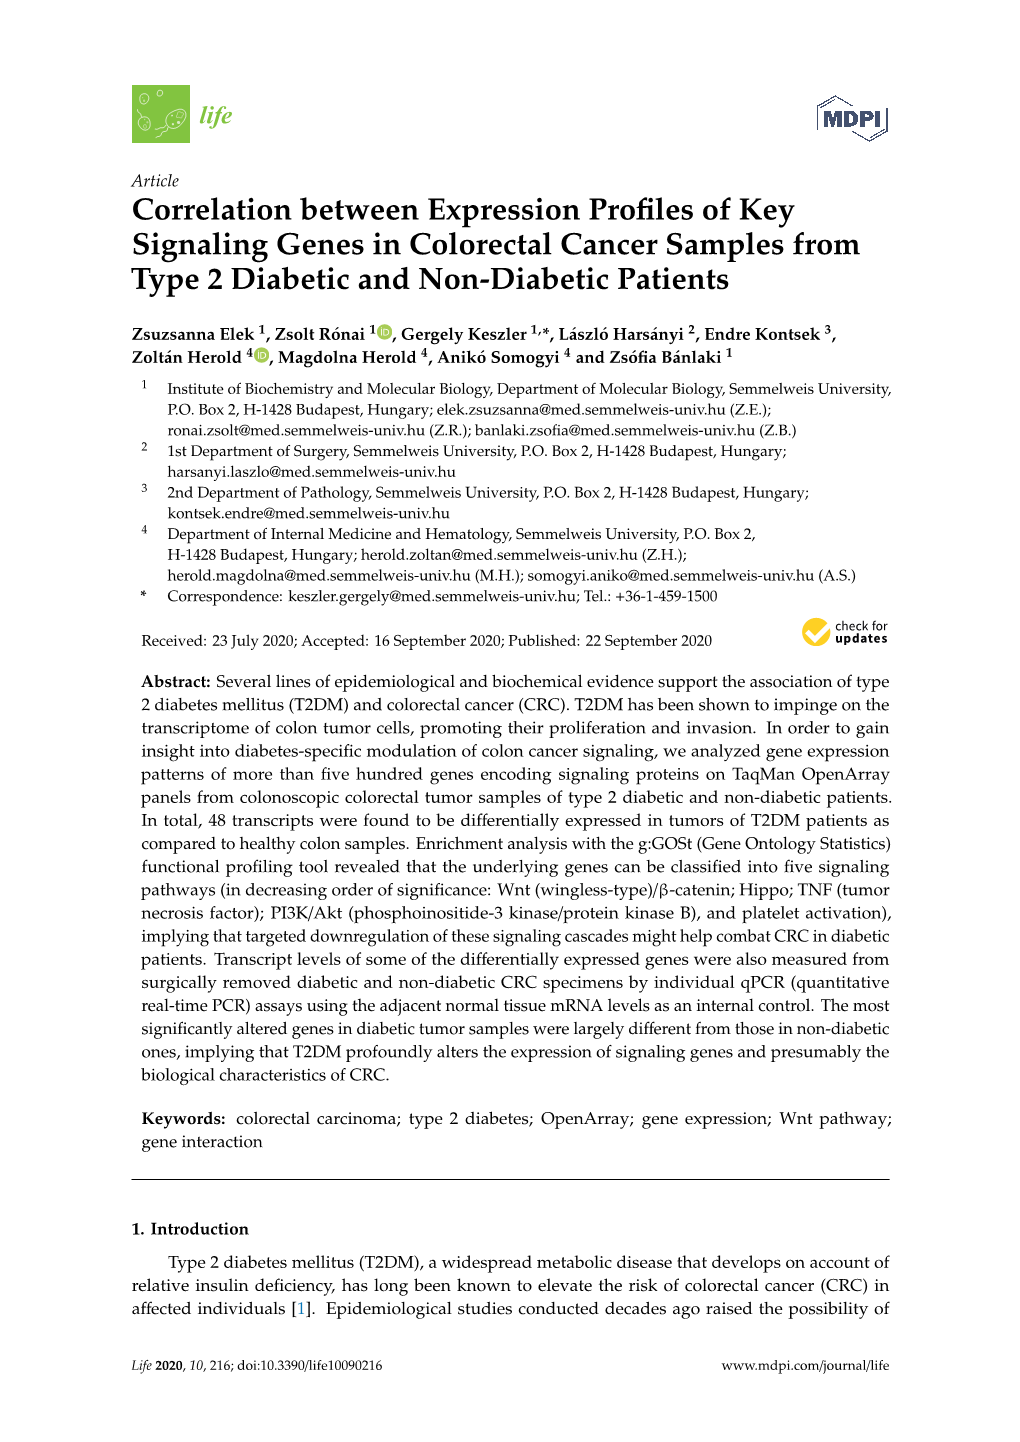 Correlation Between Expression Profiles of Key Signaling Genes in Colorectal Cancer Samples from Type 2 Diabetic and Non-Diabeti